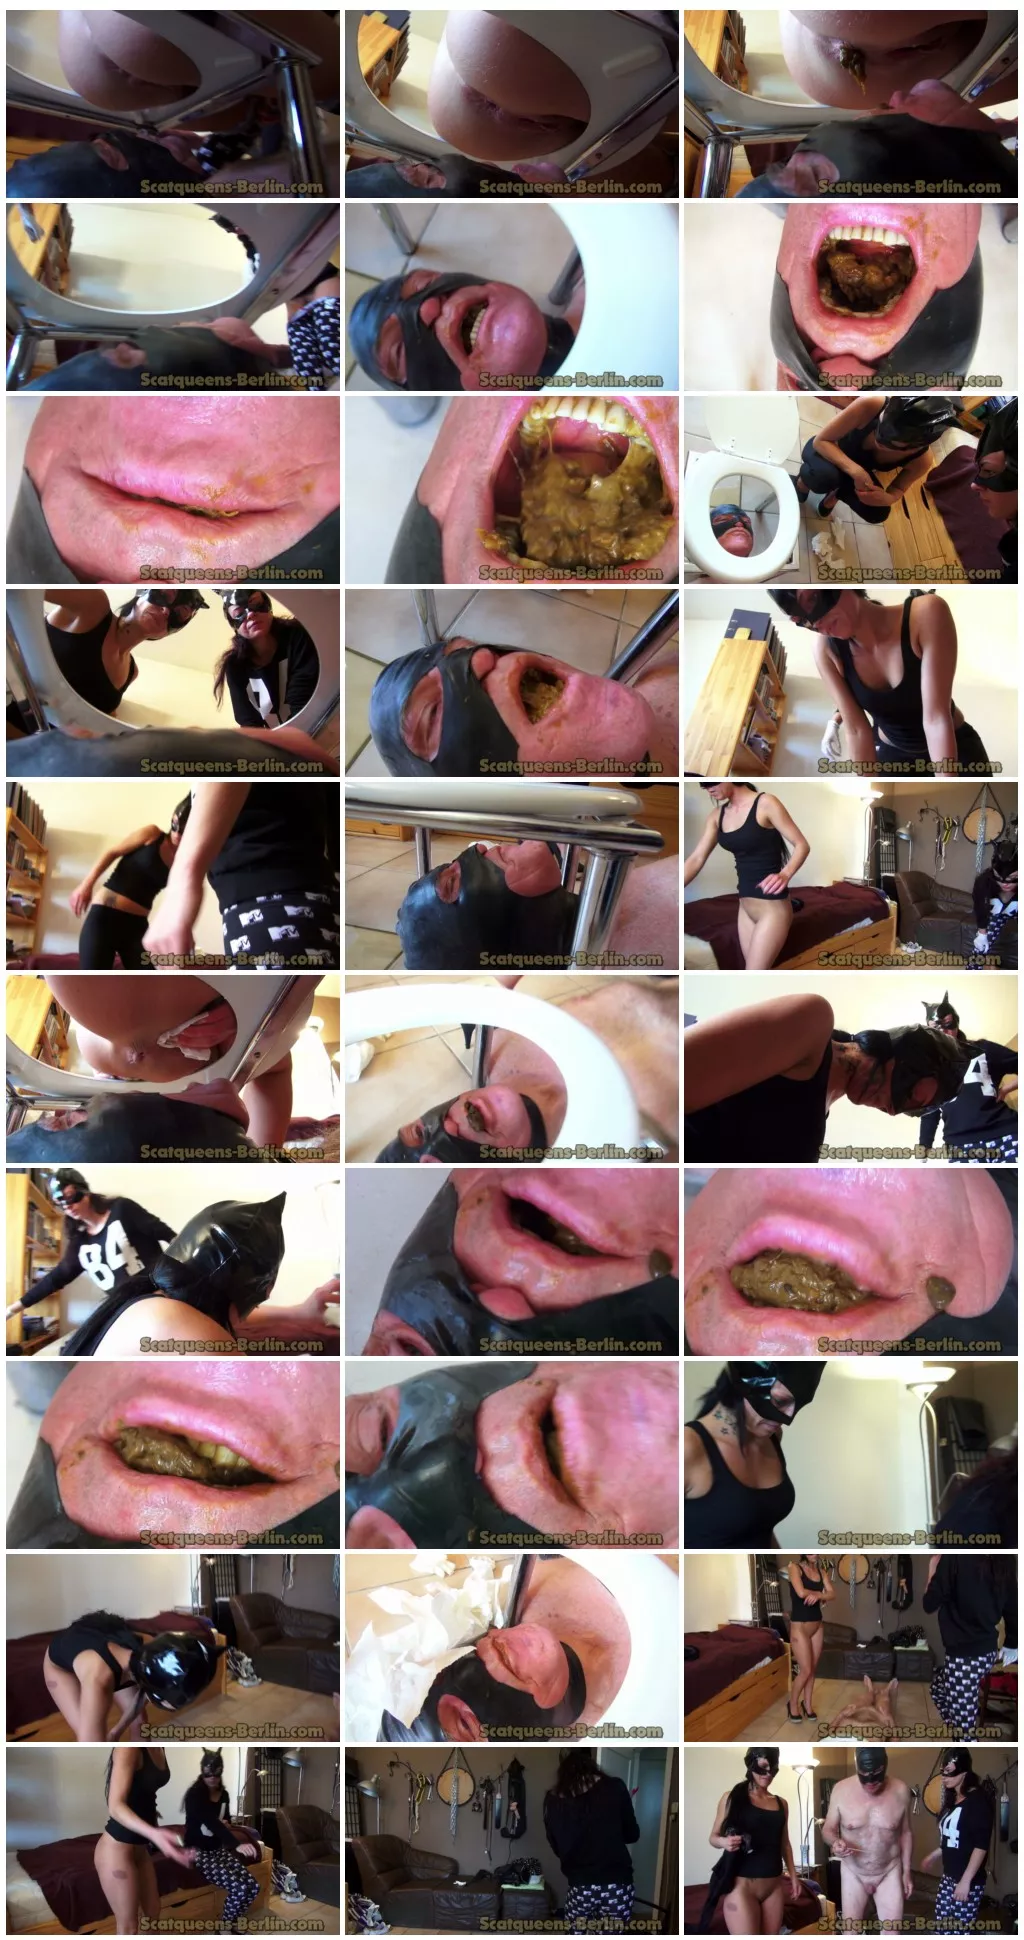  Eat Shit and Vomit Slave P1[Scat, pissing, shit, defecation, Femdom ,Toilet Slavery,Face shit,Domination, Eat shit , Humiliations,Licking, Drink pee,spitting]